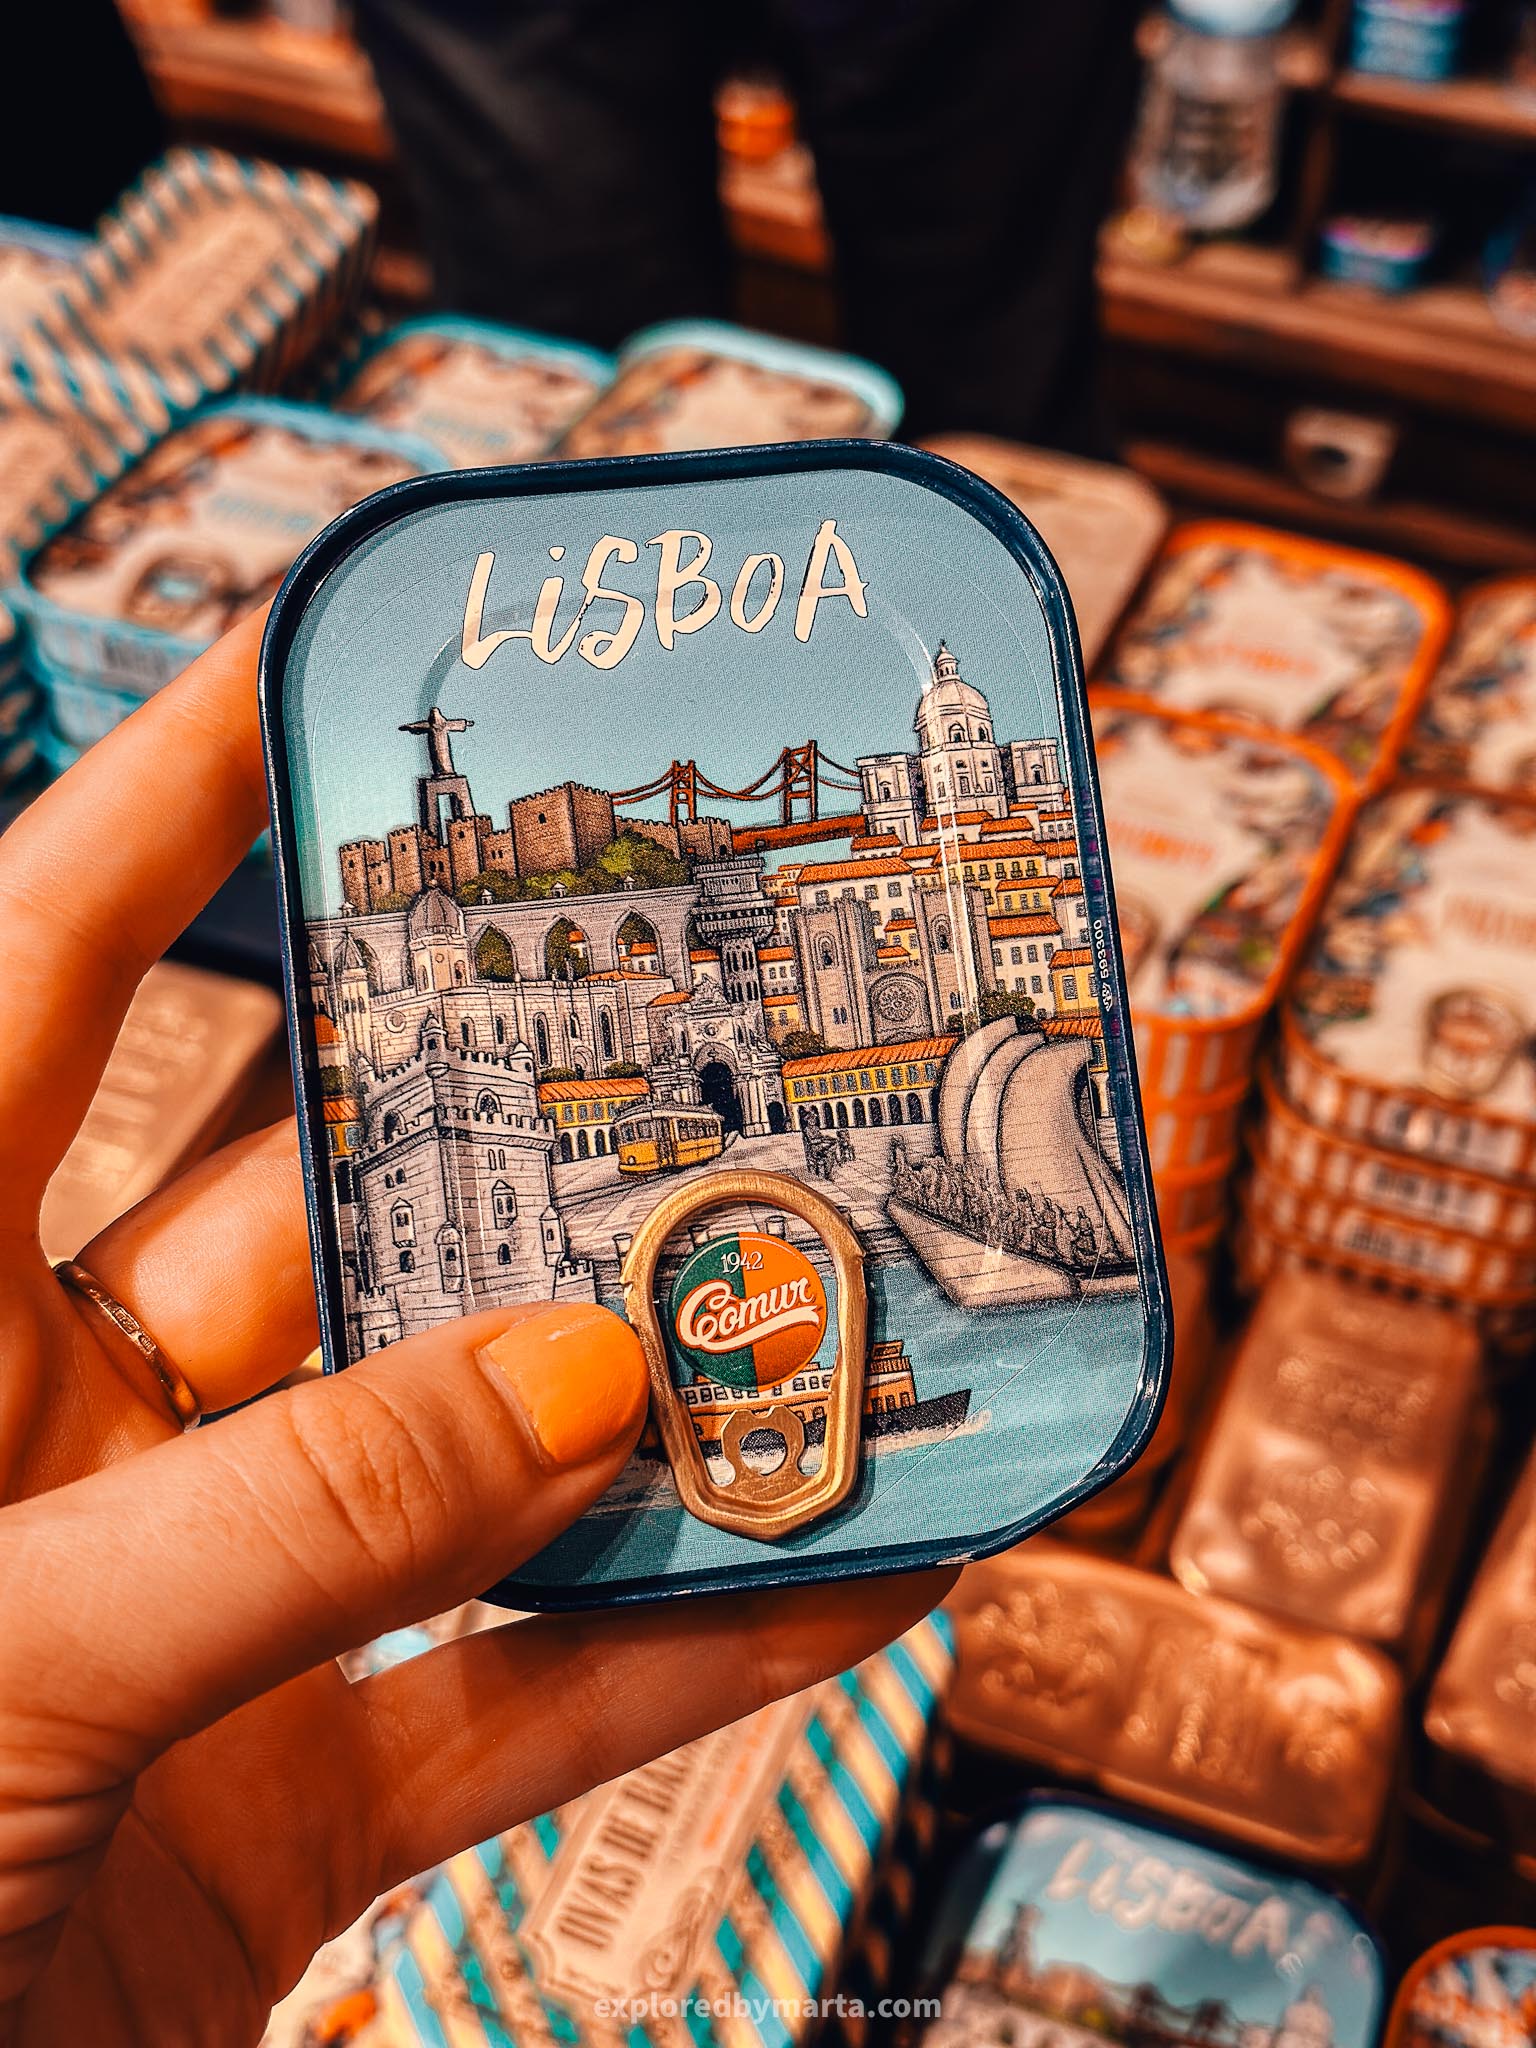 Portuguese canned fish store in Lisbon, Portugal